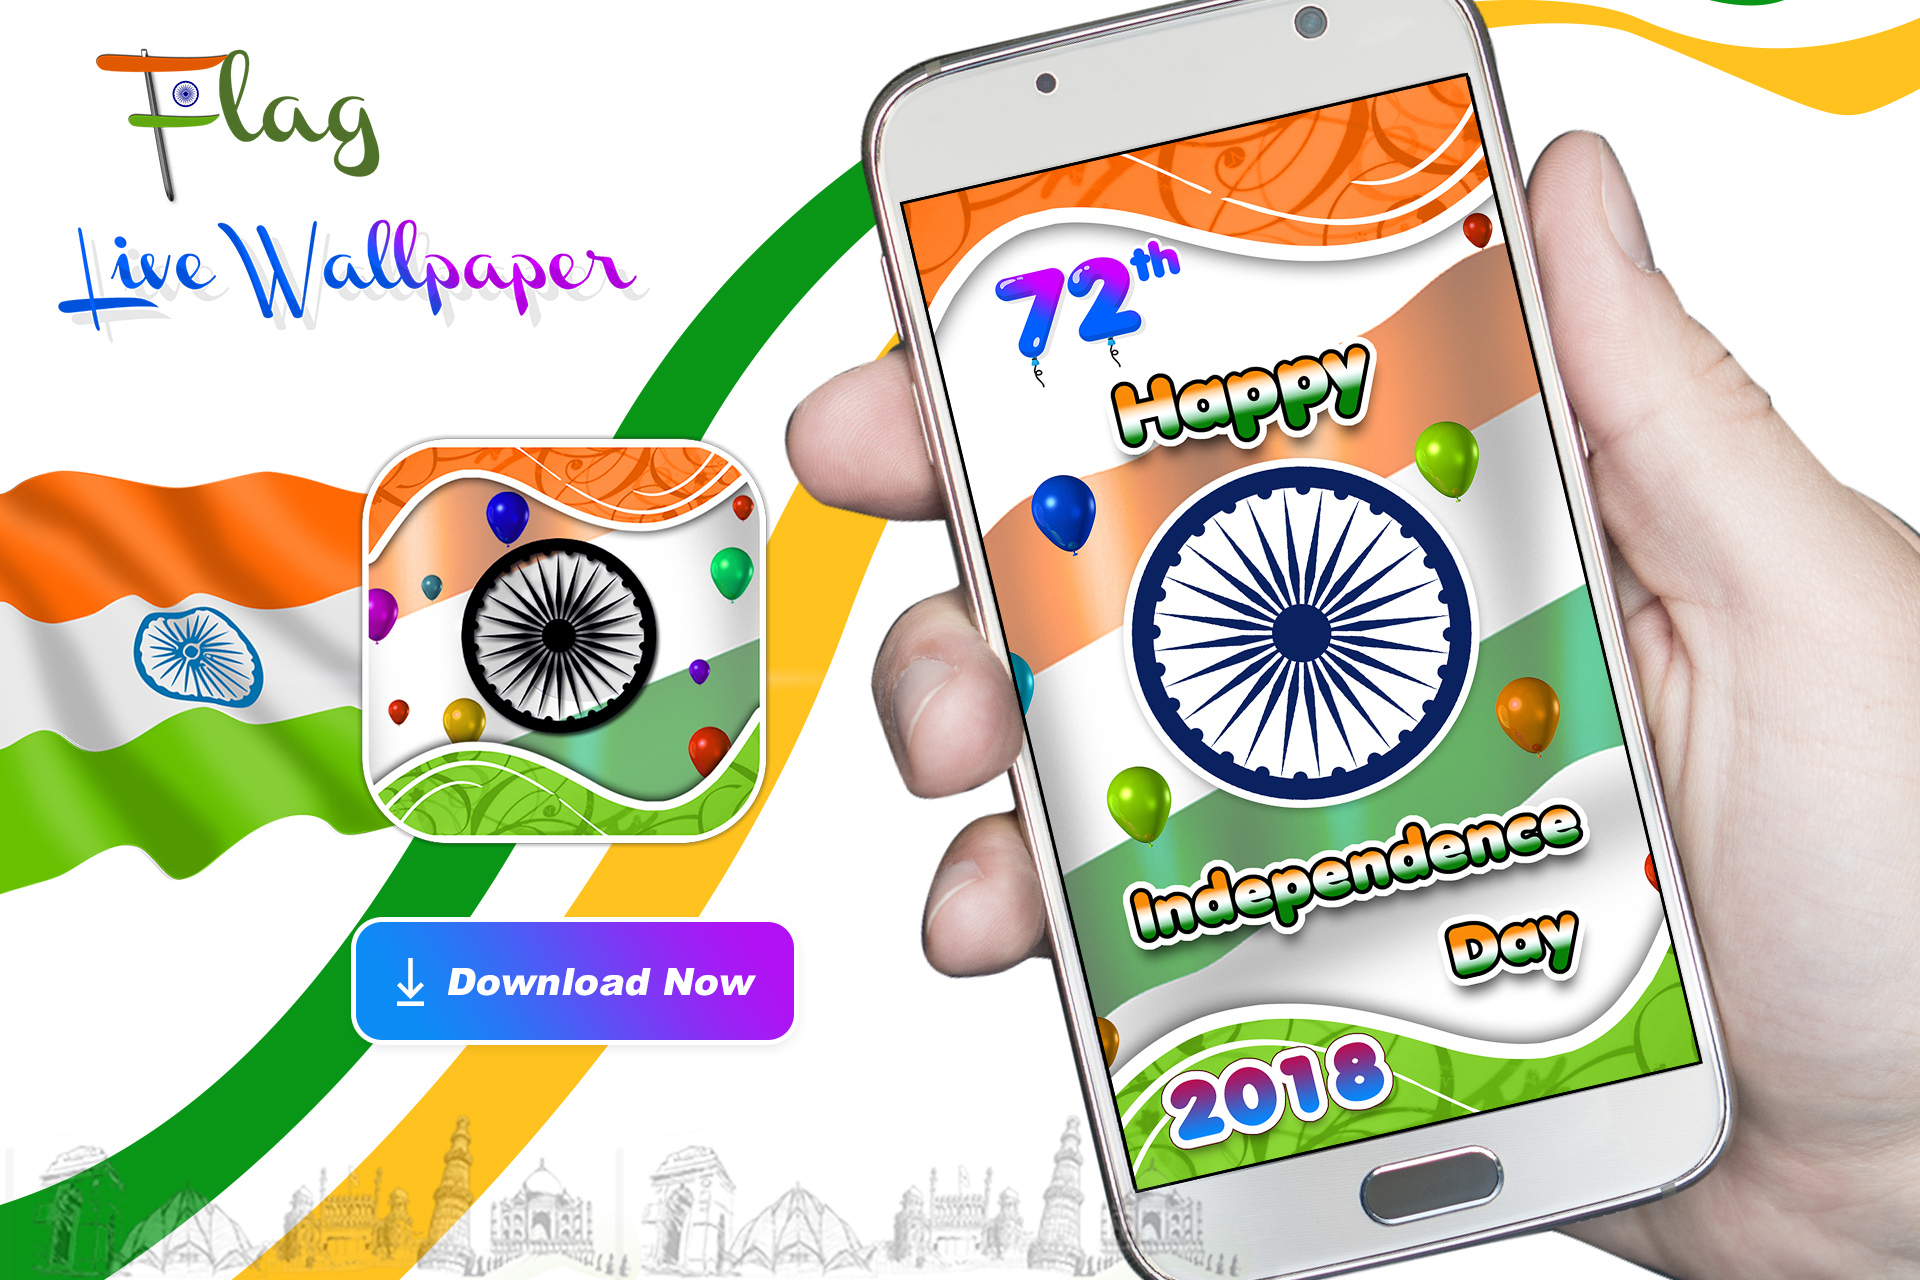 Indian Flag Live Wallpaper - Flag Independence Day India 72th - 1920x1280  Wallpaper 